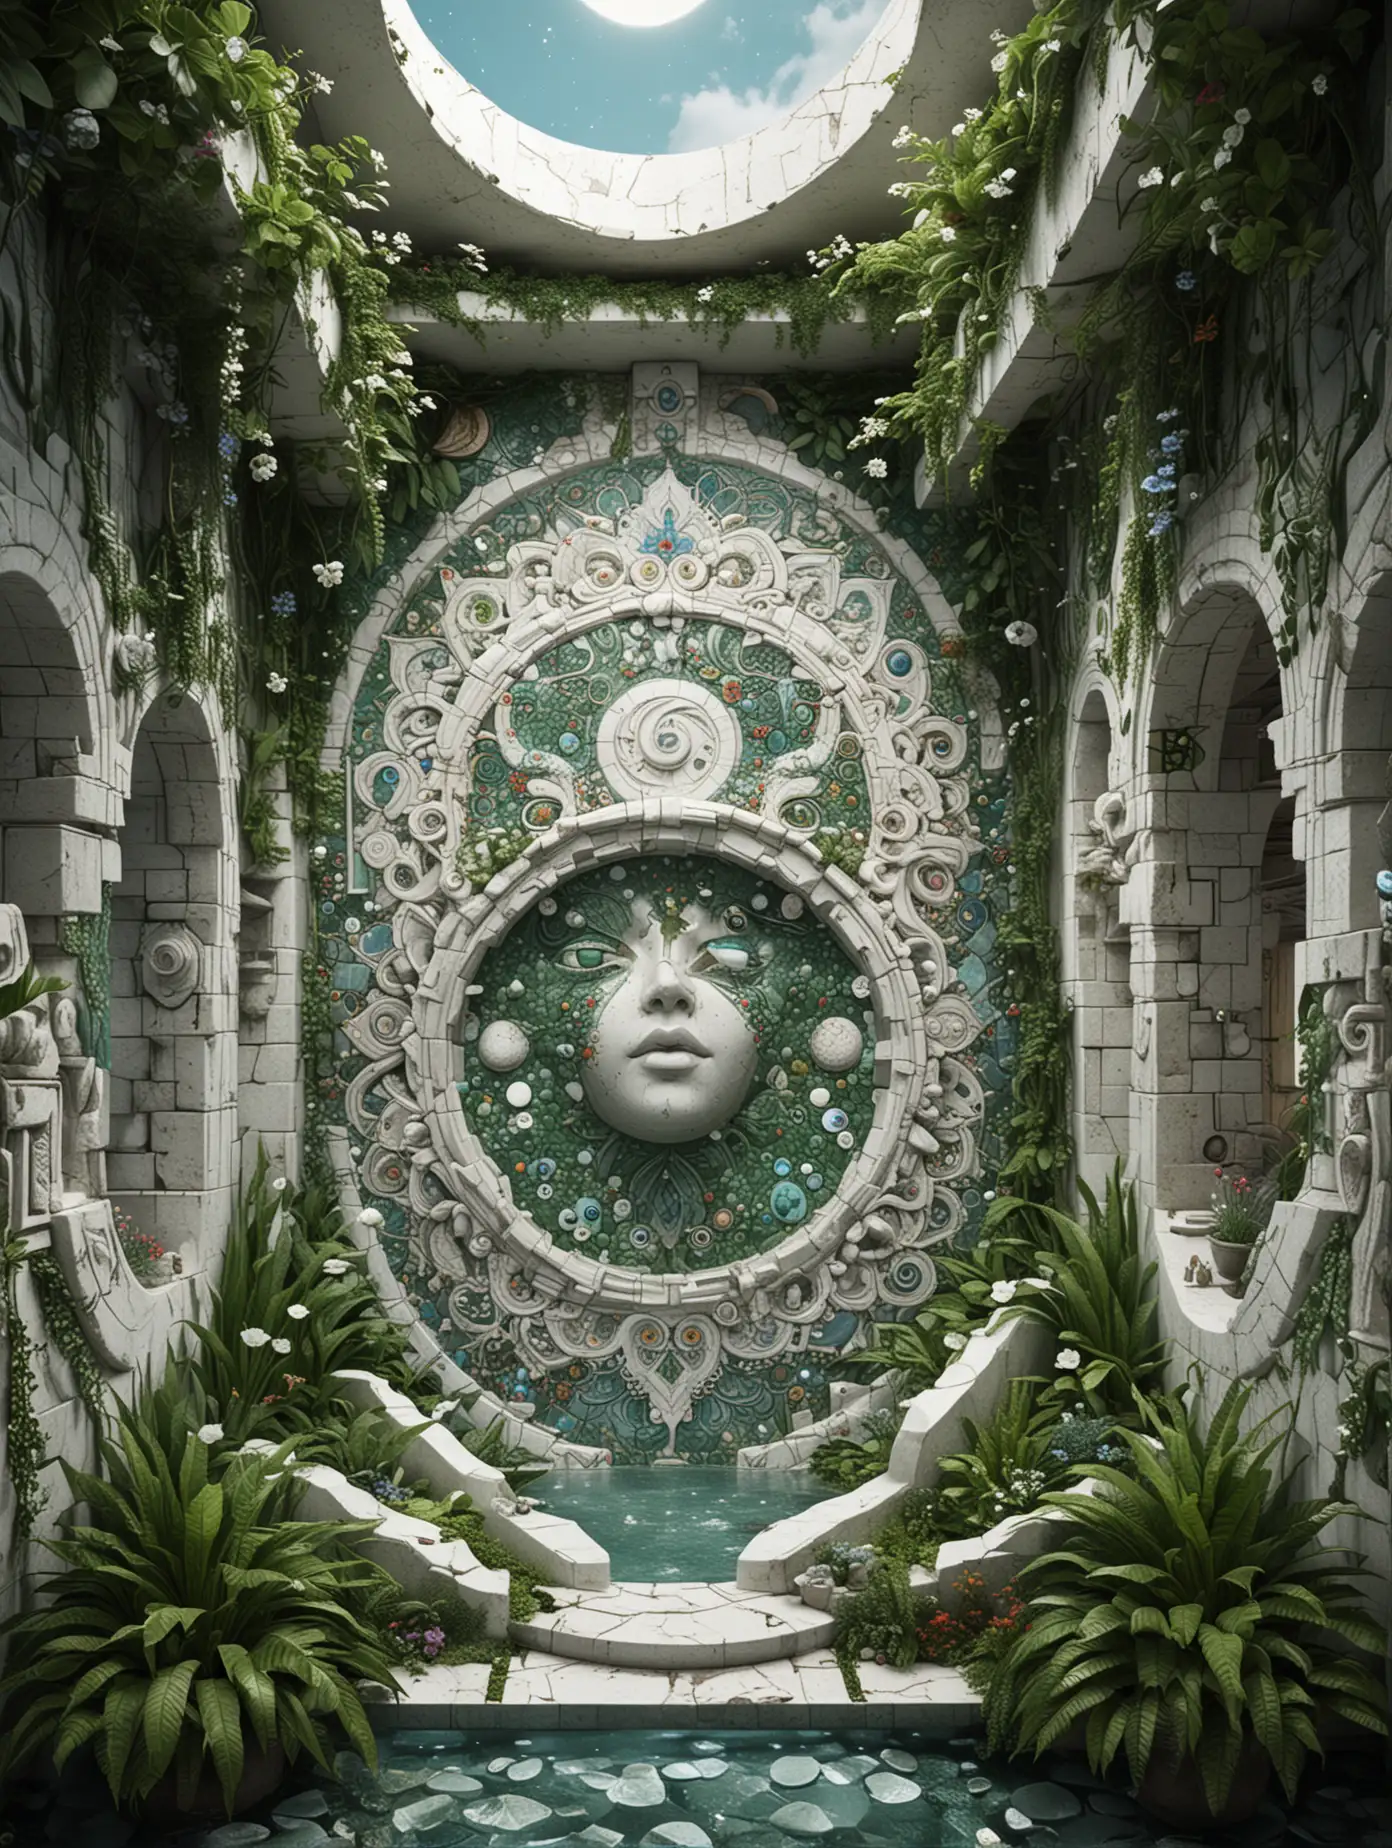 A very detailed white stone spa and pool : 1.n| a mosaic floor with colorful fractal patterns : 1.n| green alien plants and colorful flowers : 1n| carved walls adorned with colorful alchemical symbols : 1.n| amphoras with detailed colorful magical symbols : 1.n| very detailed moon goddess face sculpture : .9n| clear,dark nordic atmosphere : 1.n| highly detailed,high precision,focus on textures, hyperrealistic,bright : 1.